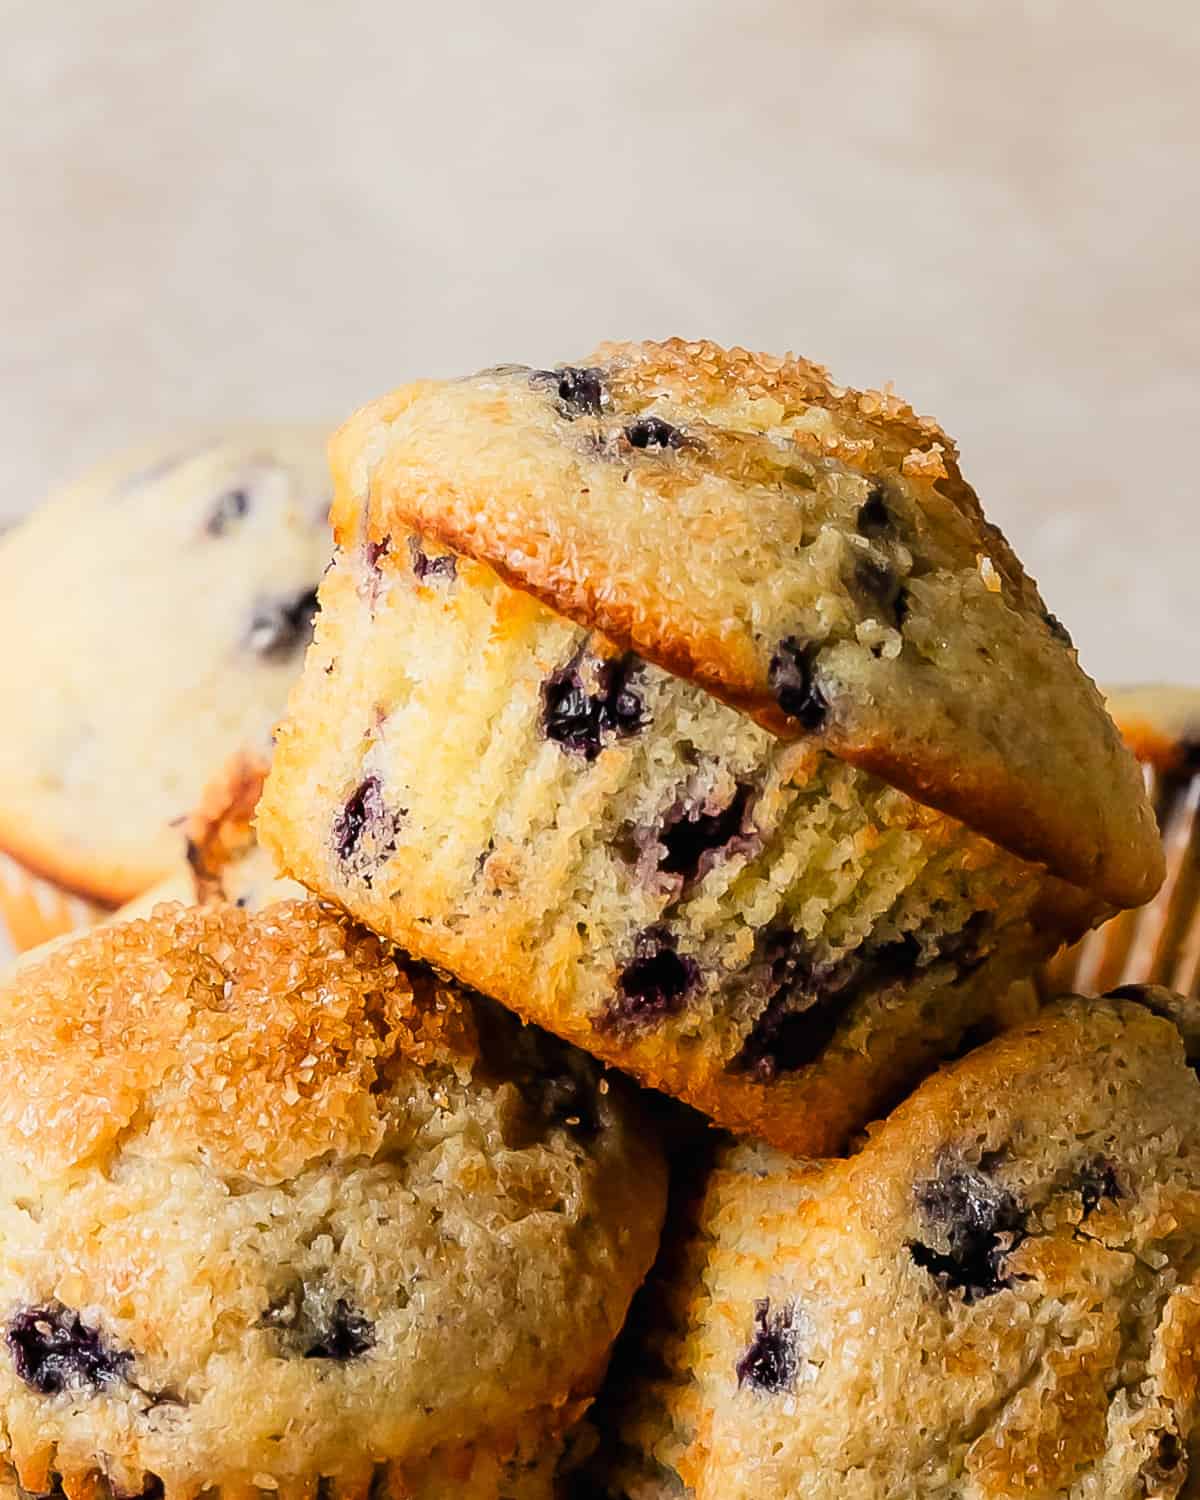 These buttermilk blueberry muffins are light, fluffy and incredibly moist buttermilk muffins filled with fresh blueberries. They’re bakery style muffins with beautiful tall, domed tops covered in crunchy bits of sparkling sugar. This quick and easy blueberry buttermilk muffin recipe makes the best blueberry muffins you’ll want to make over and over again.